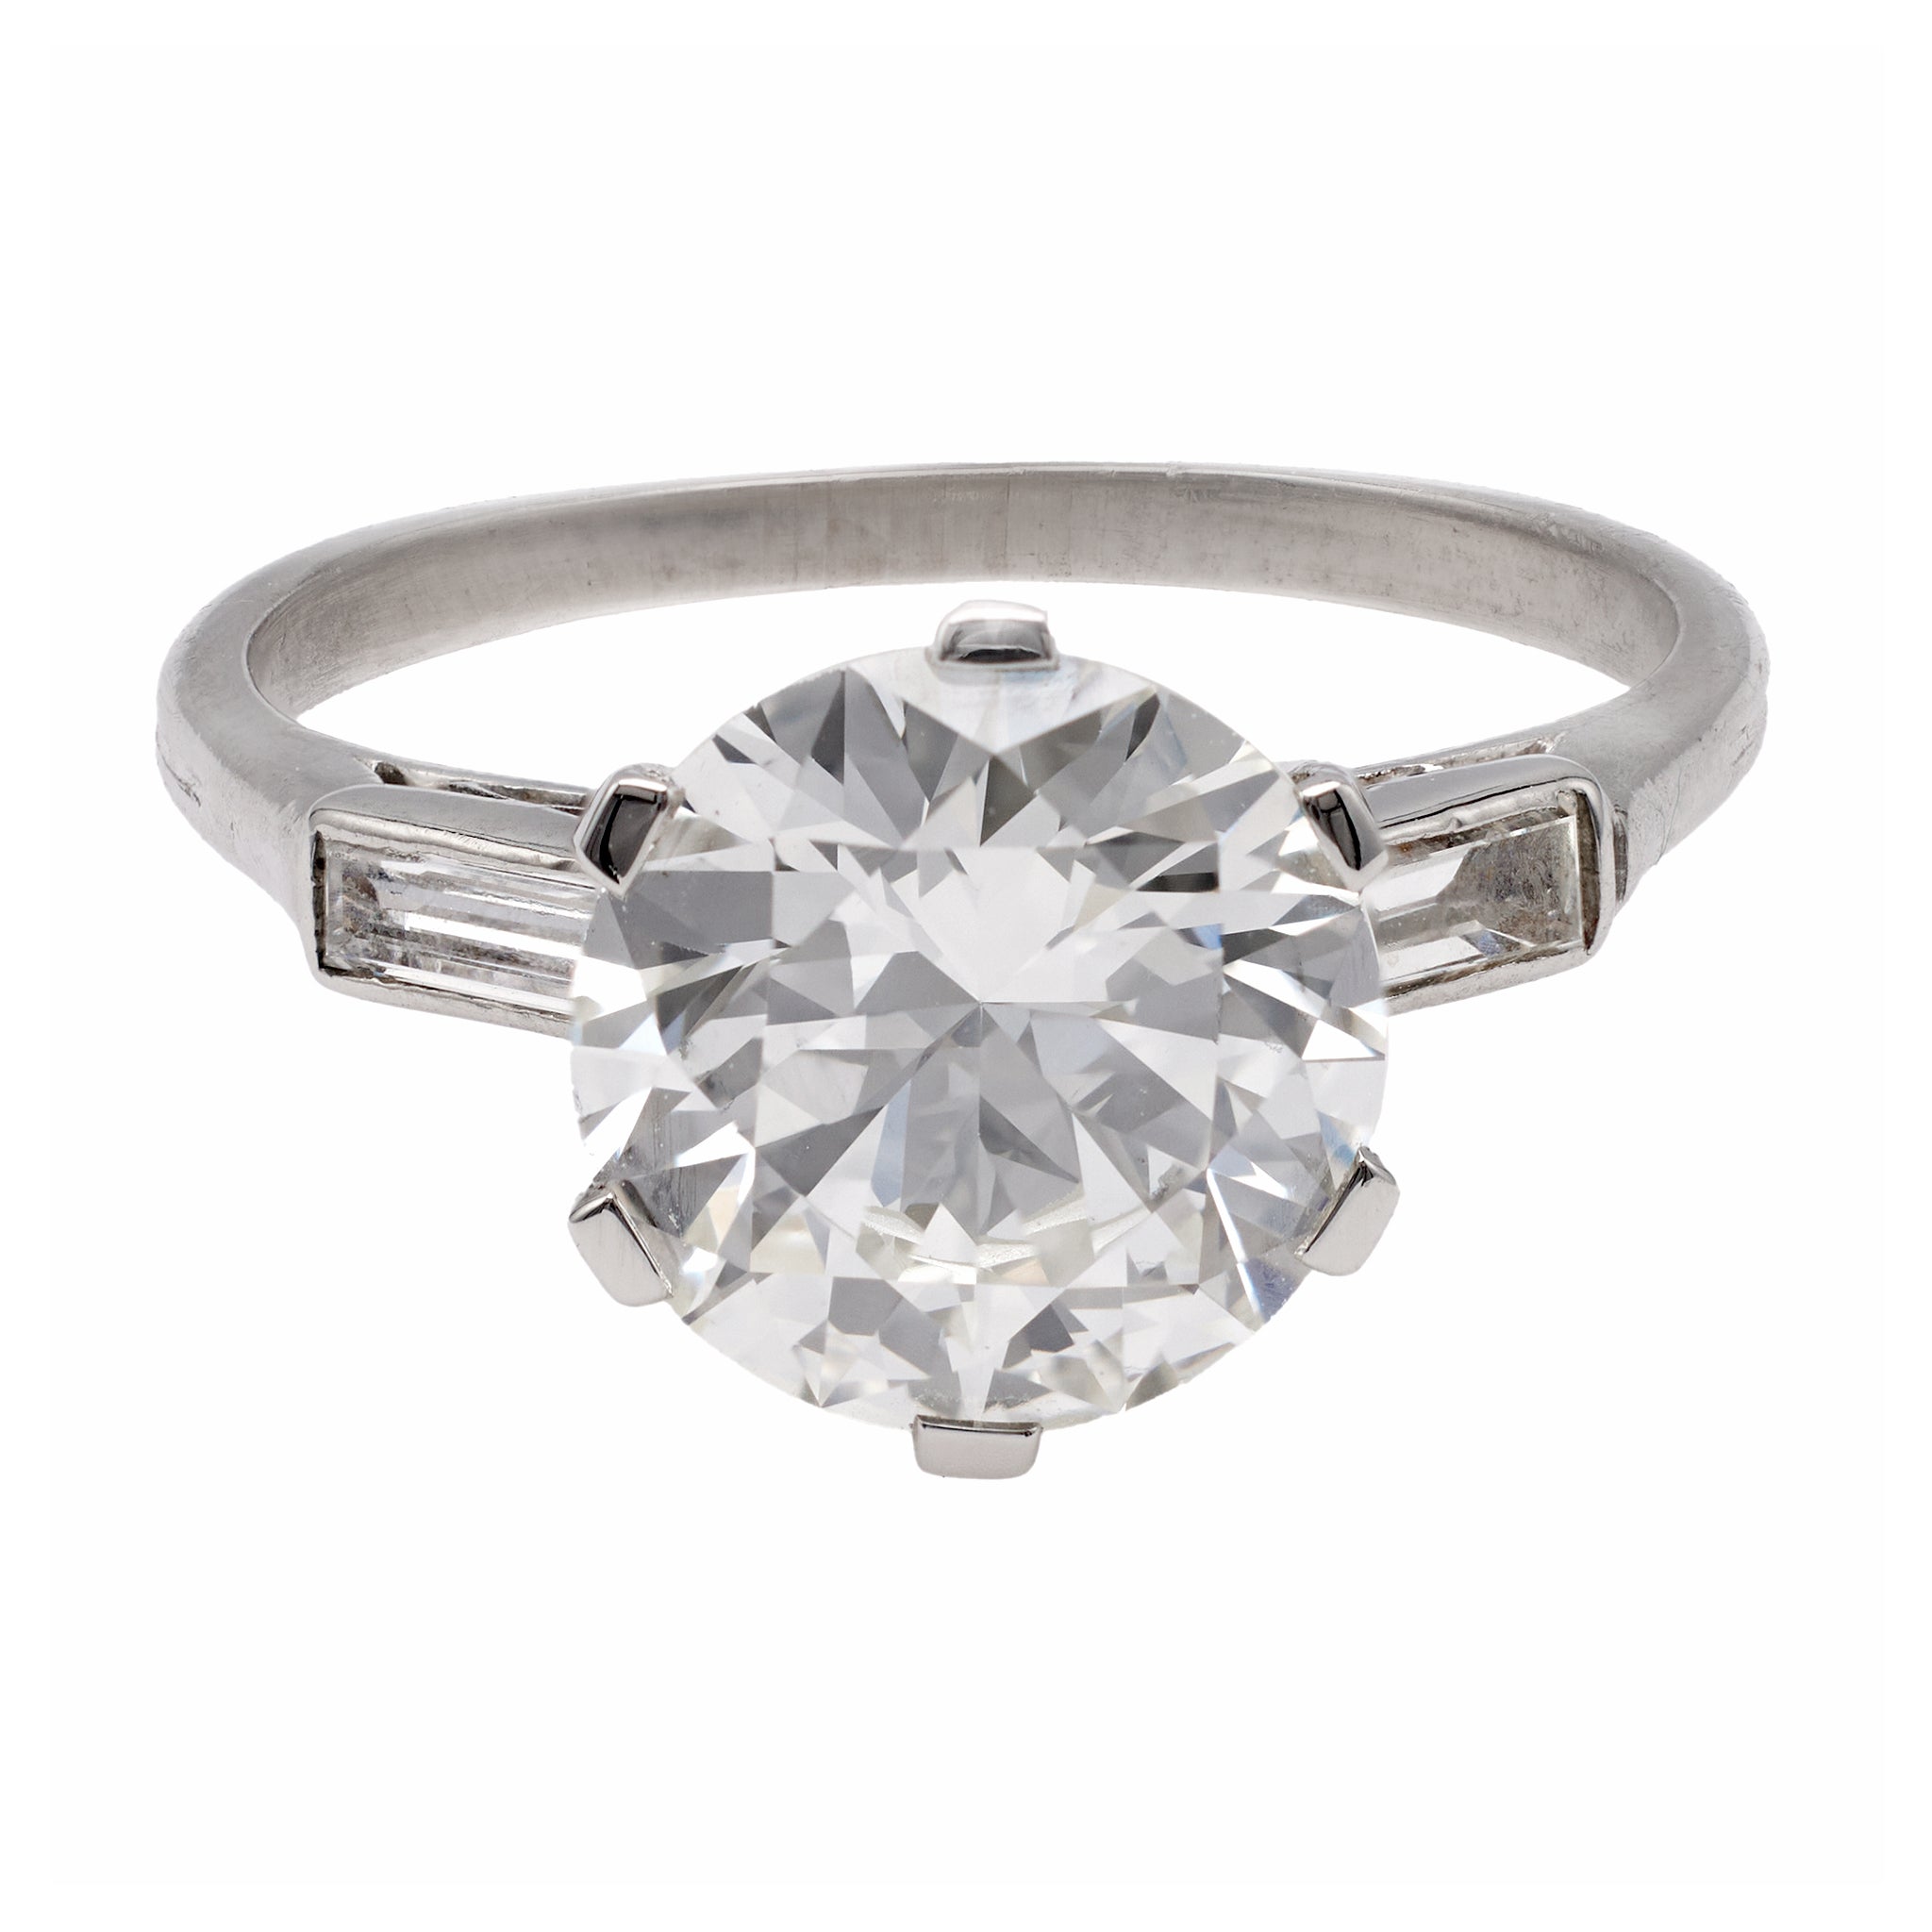 Art Deco French GIA 2.99 Carat Round Brilliant Cut Diamond Platinum Ring Rings Jack Weir & Sons   